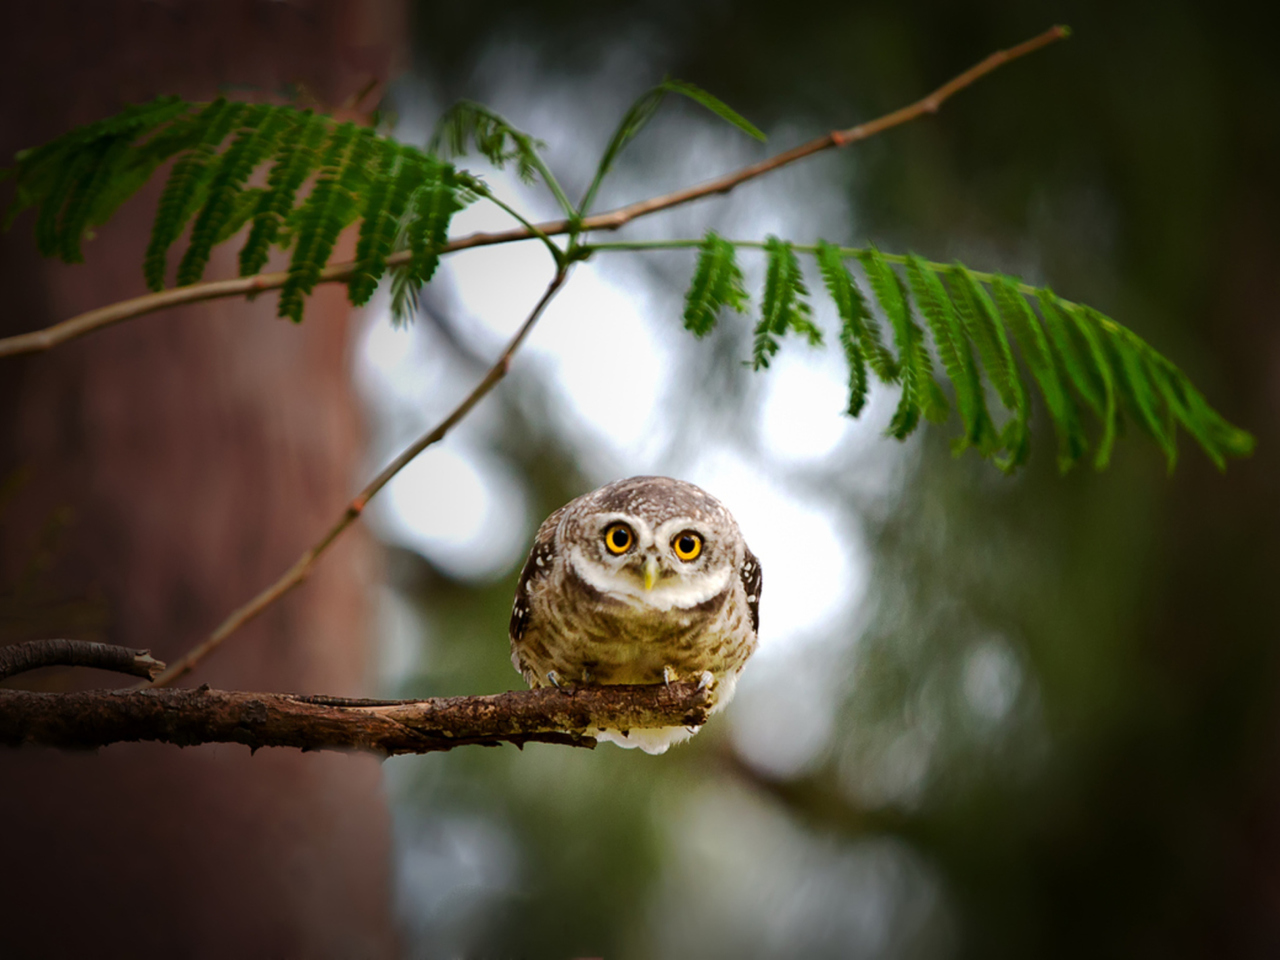 Cute And Funny Little Owl With Big Eyes wallpaper 1280x960